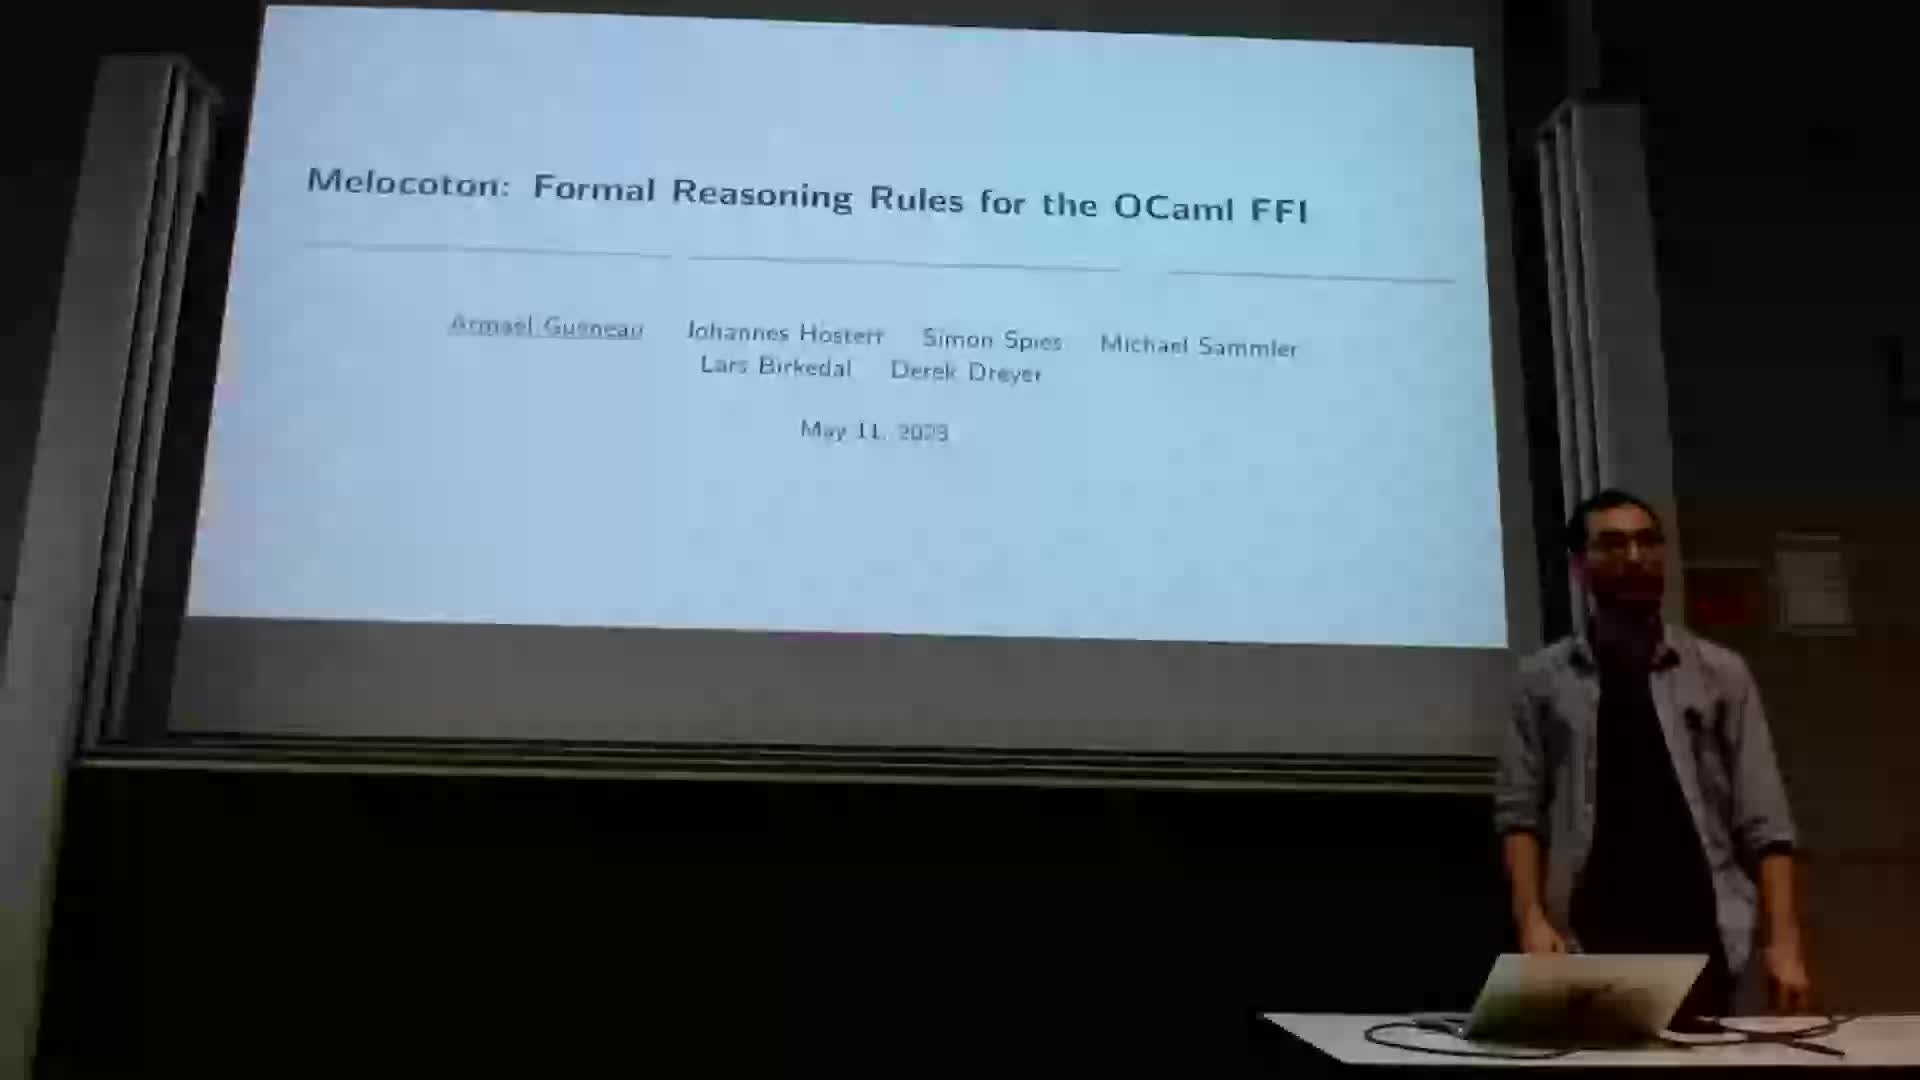 Formal reasoning rules for the OCaml FFI